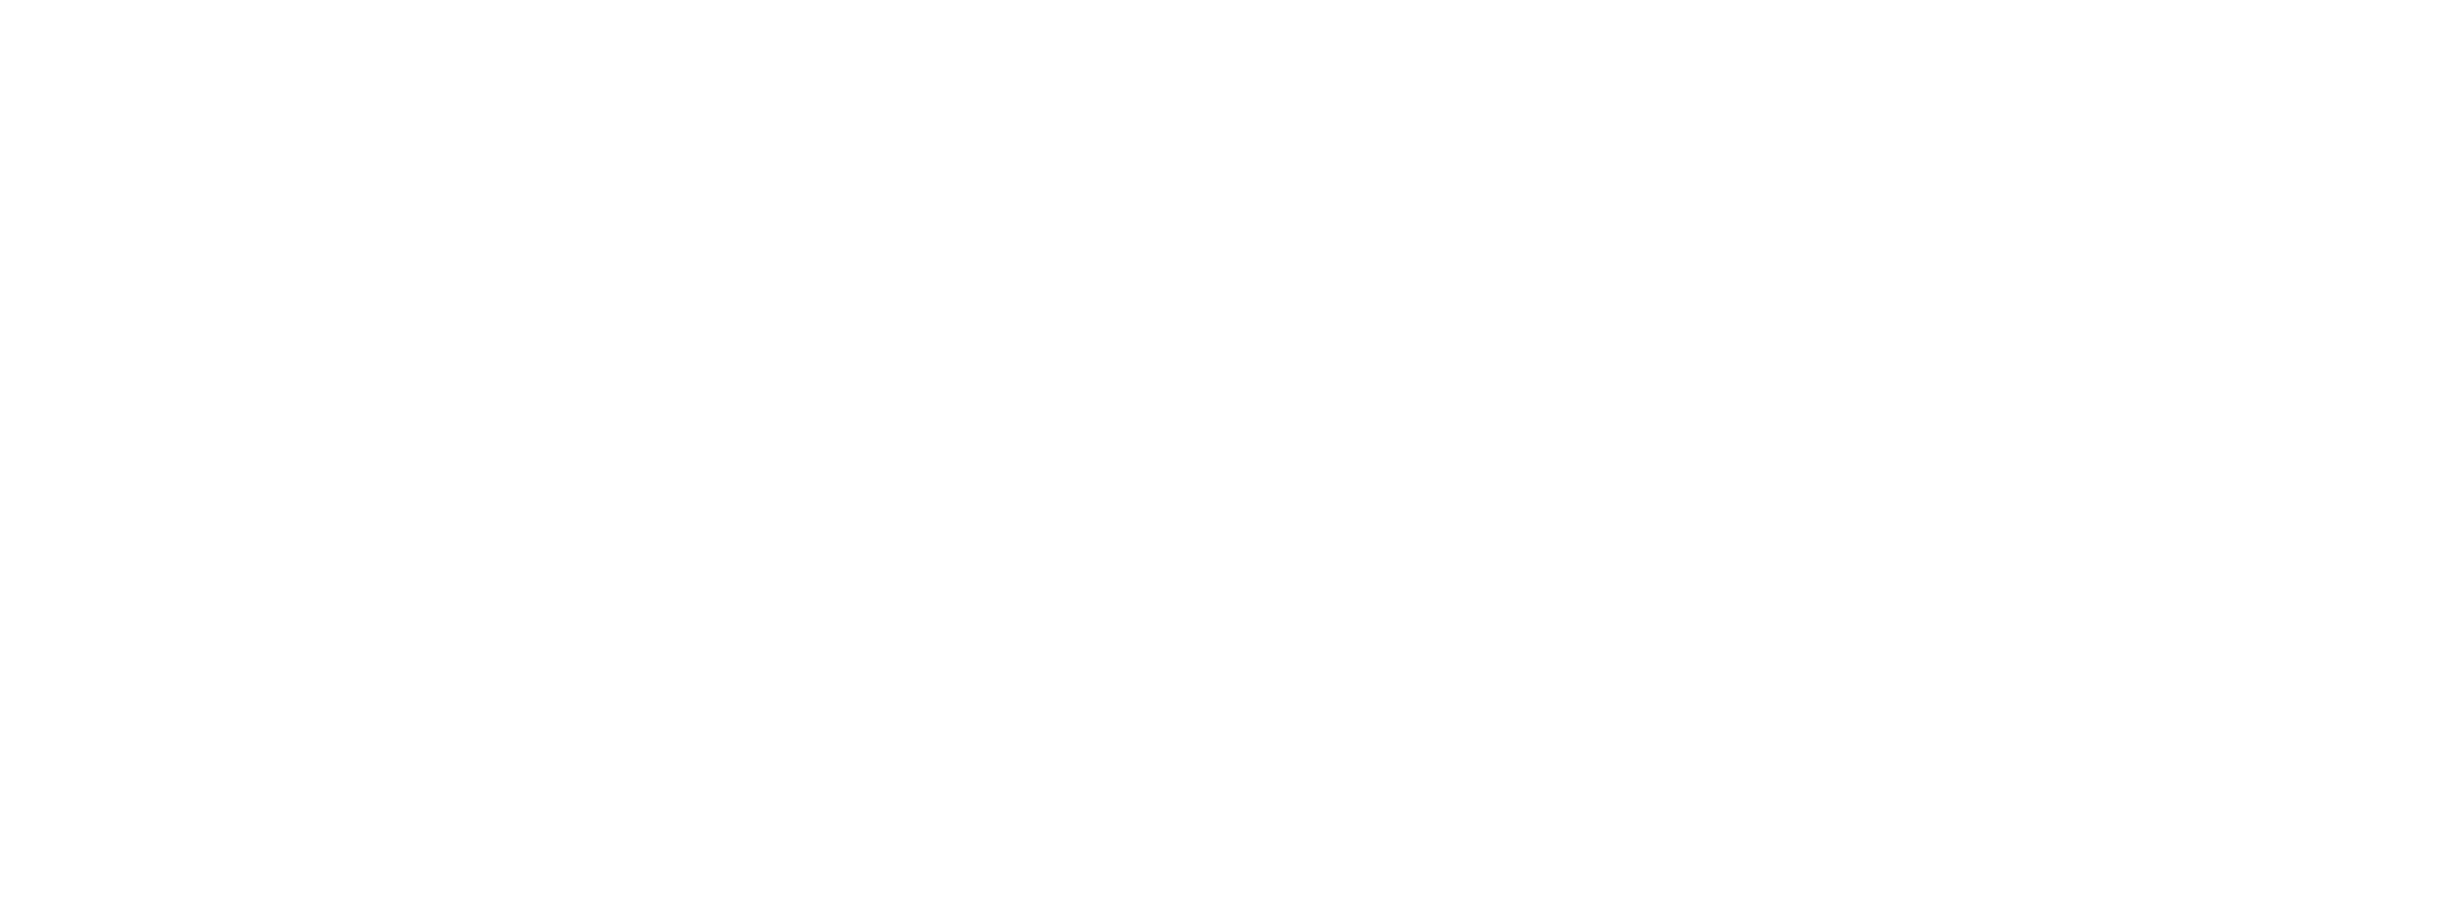 Black and White Construction Logo - Commercial Construction Company | UK - Midlands & South